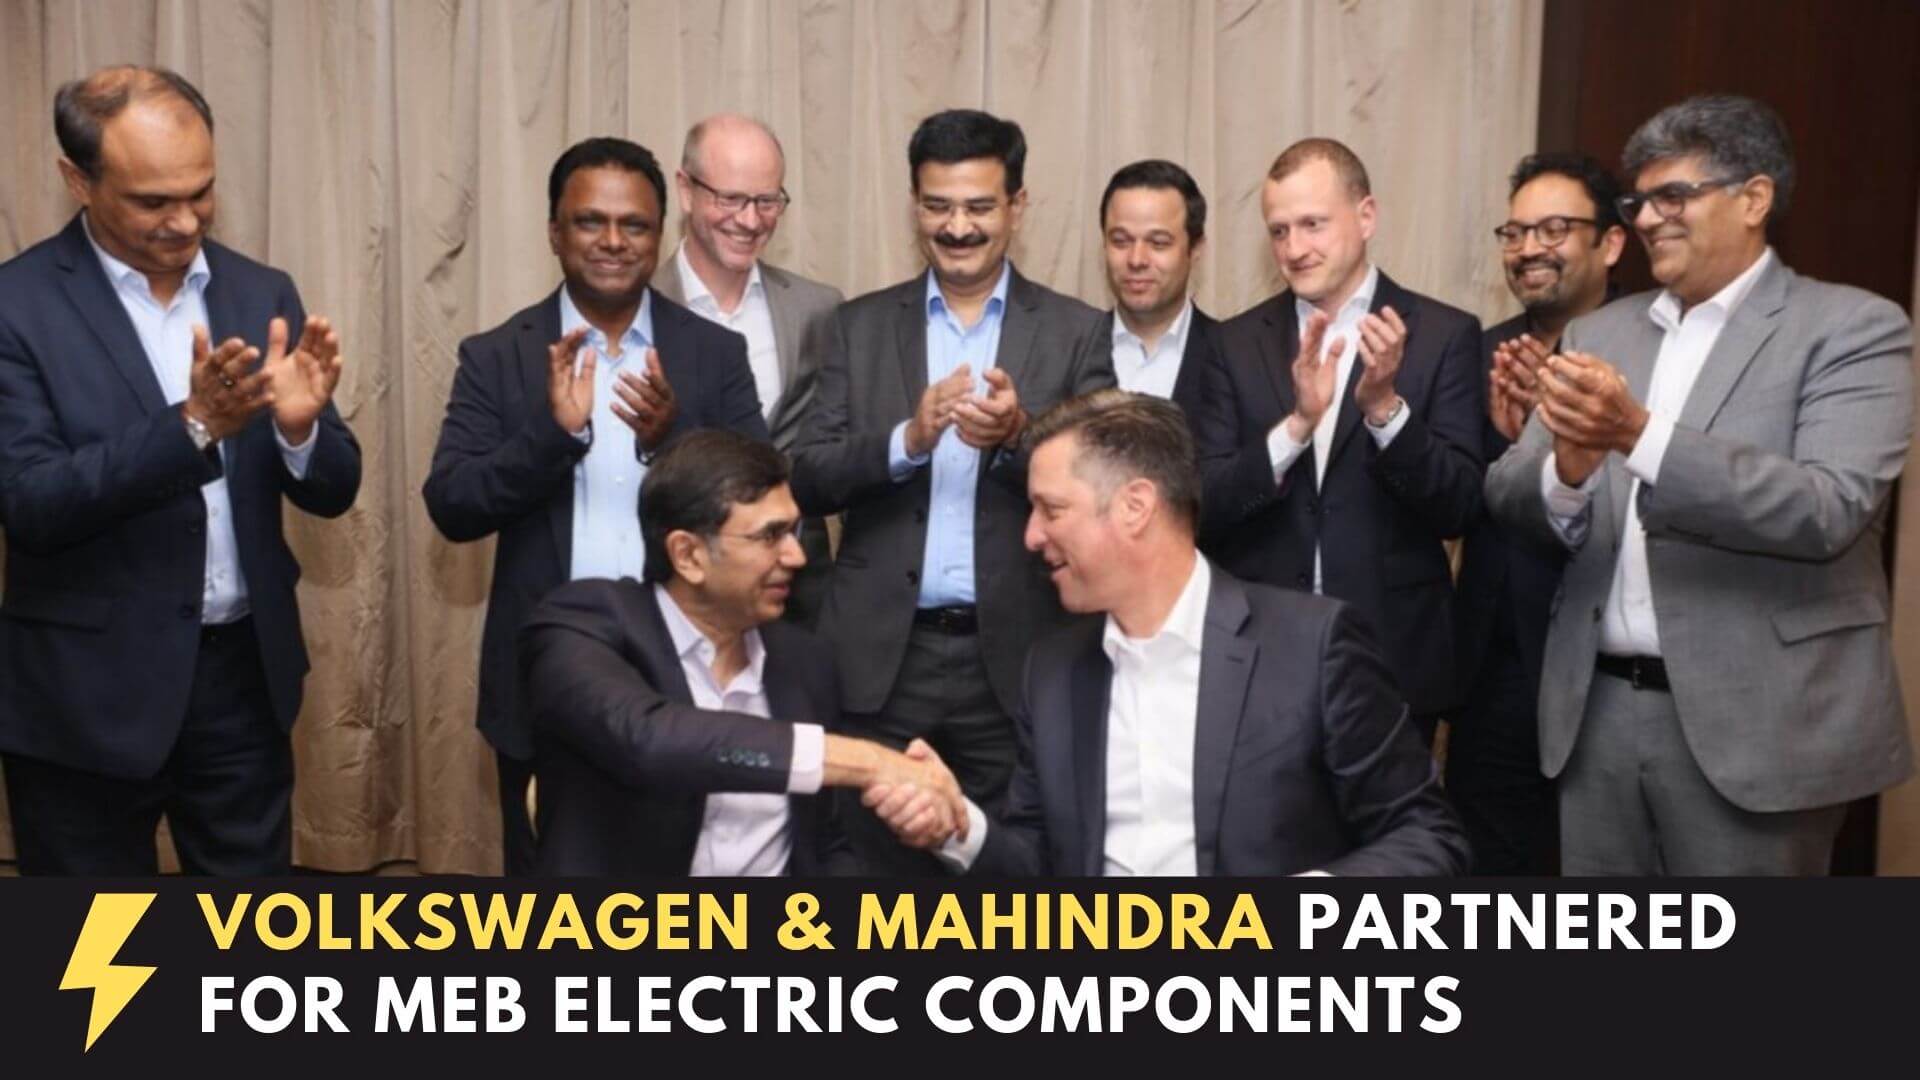 https://e-vehicleinfo.com/volkswagen-mahindra-partnered-for-meb-electric-components/